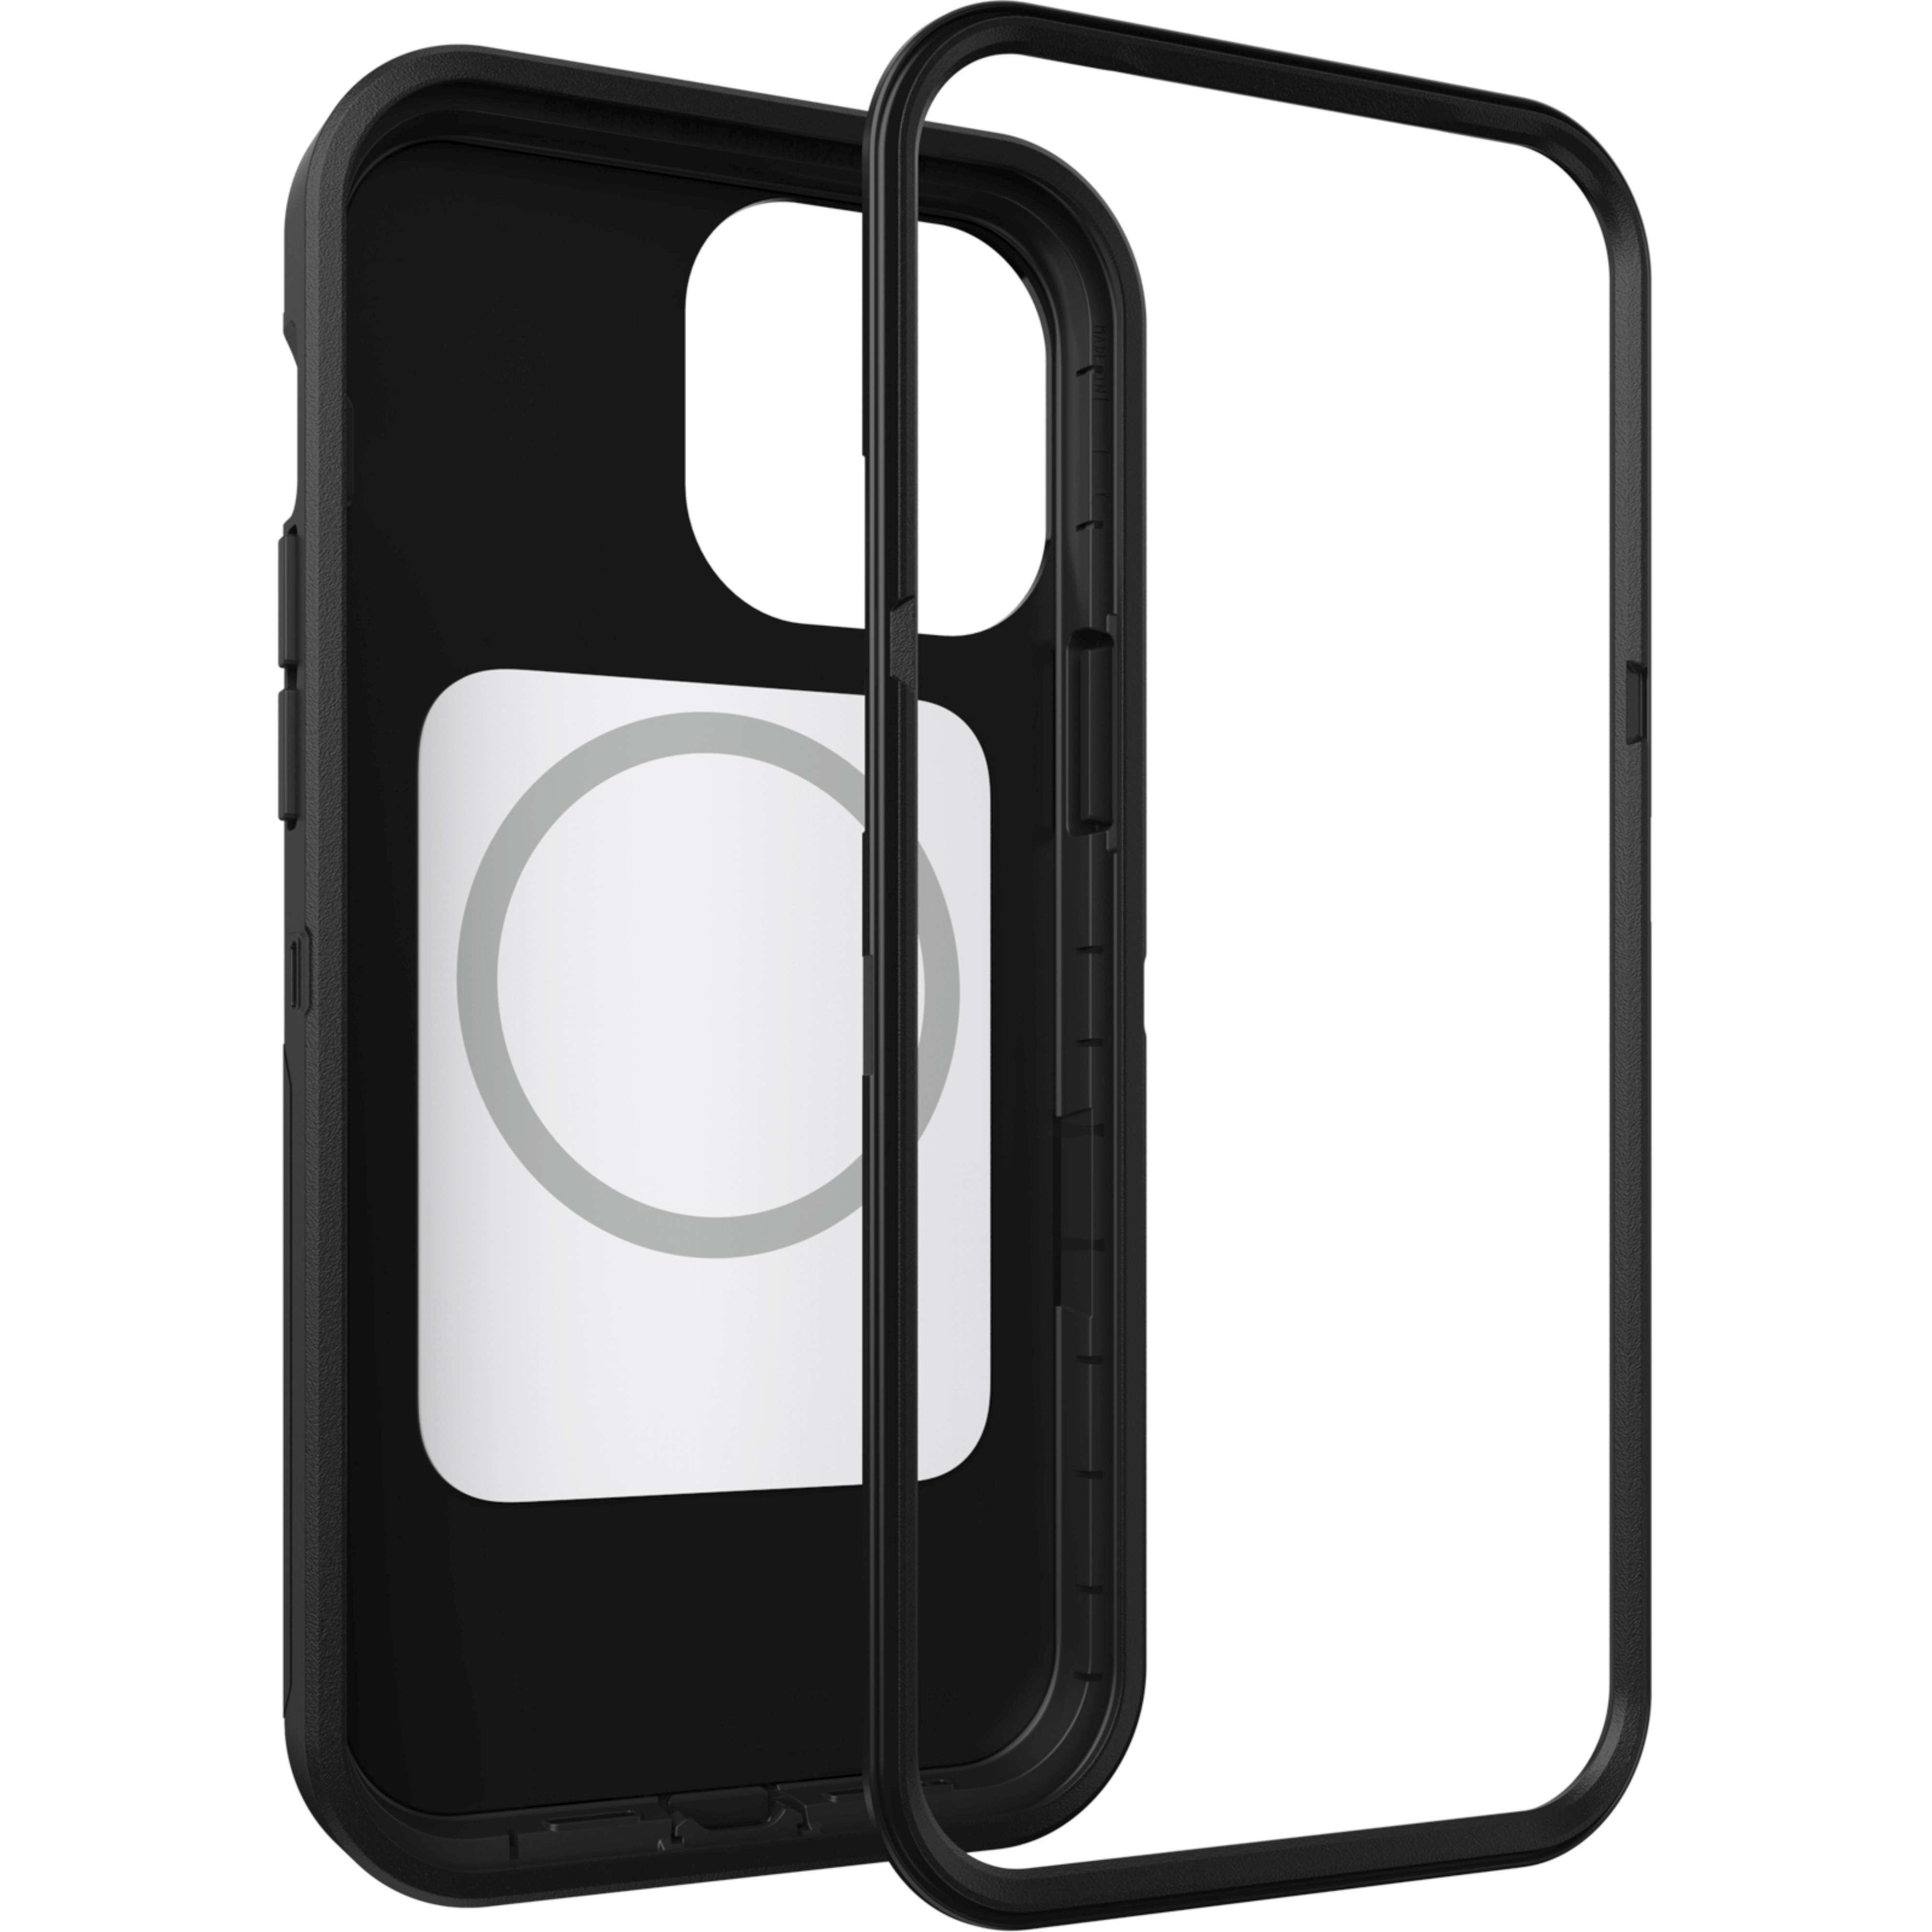 OTTERBOX Defender, Max, Schwarz iPhone Apple, Backcover, 13 Pro